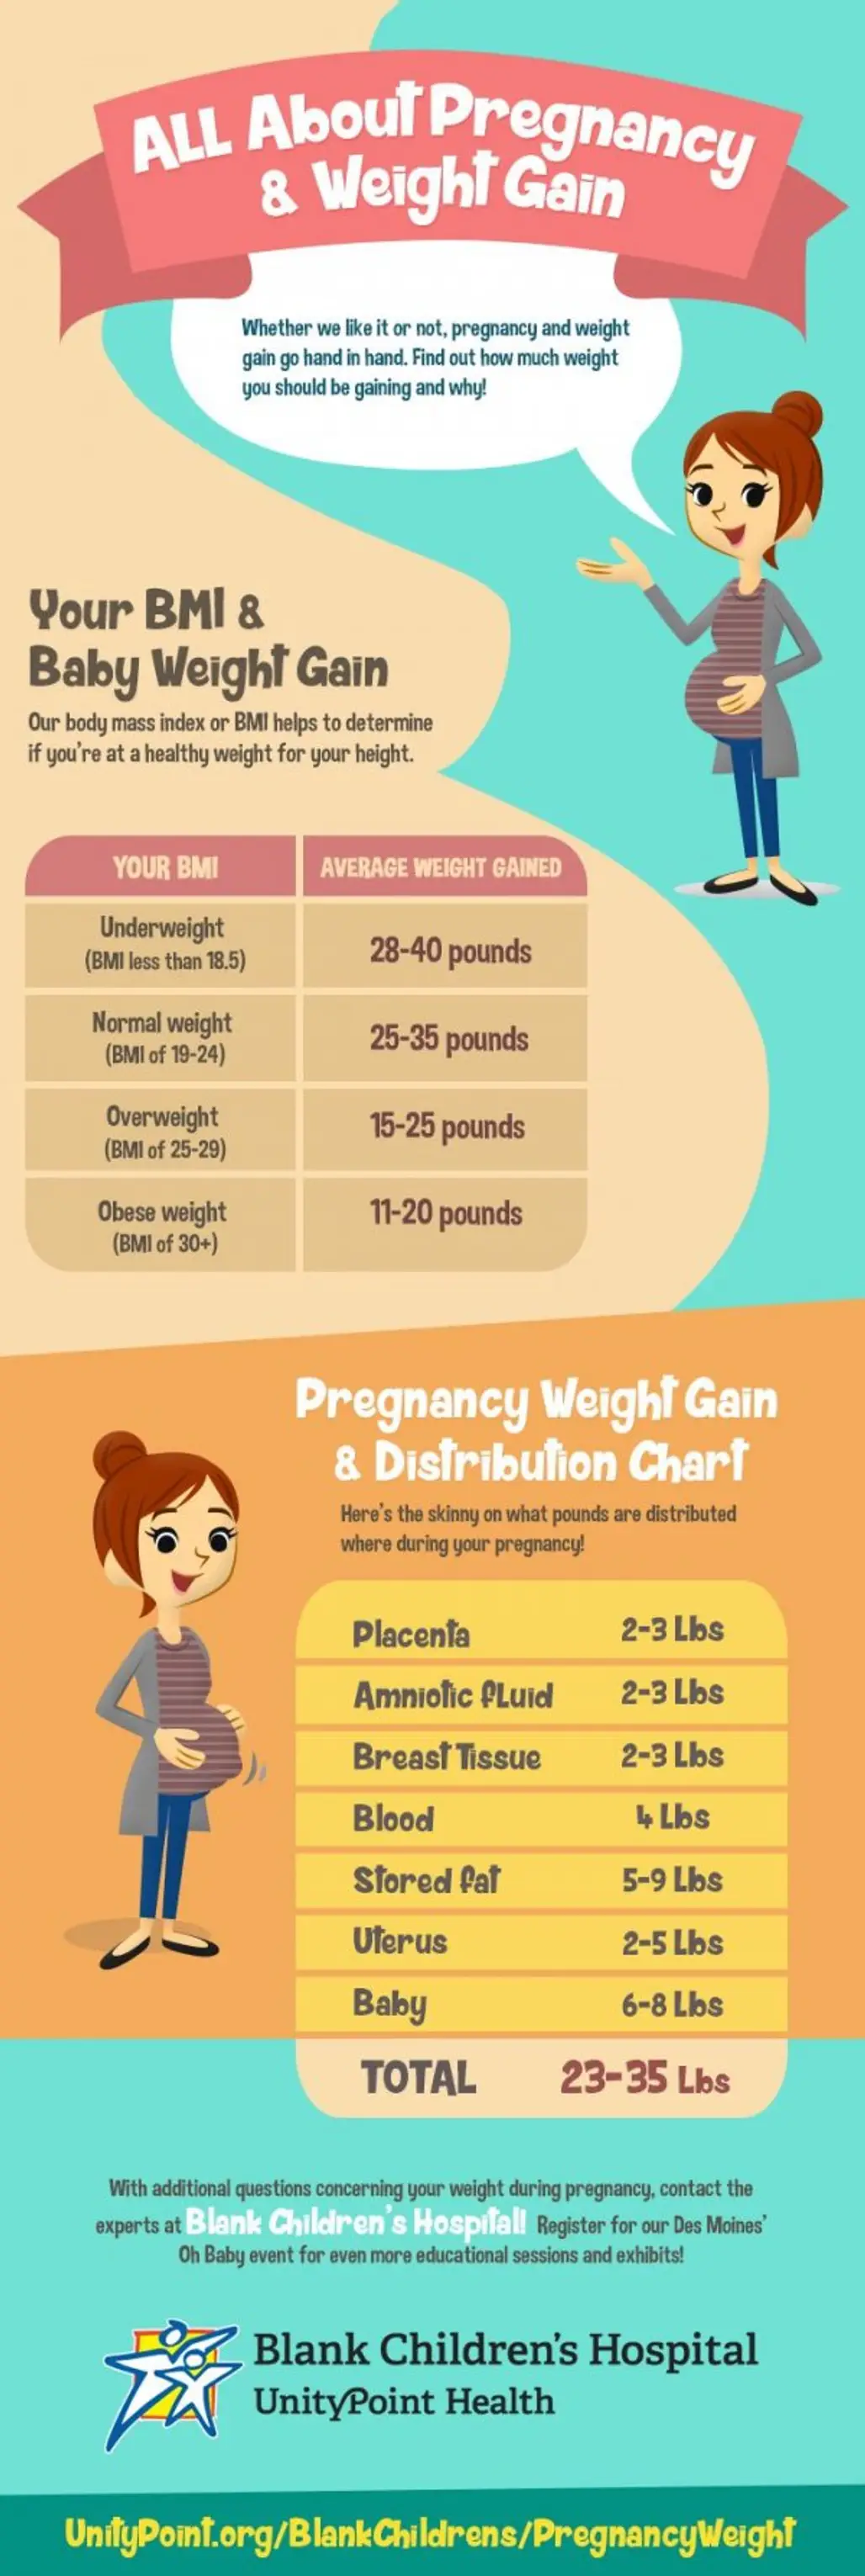 All about Pregnancy & Weight Gain